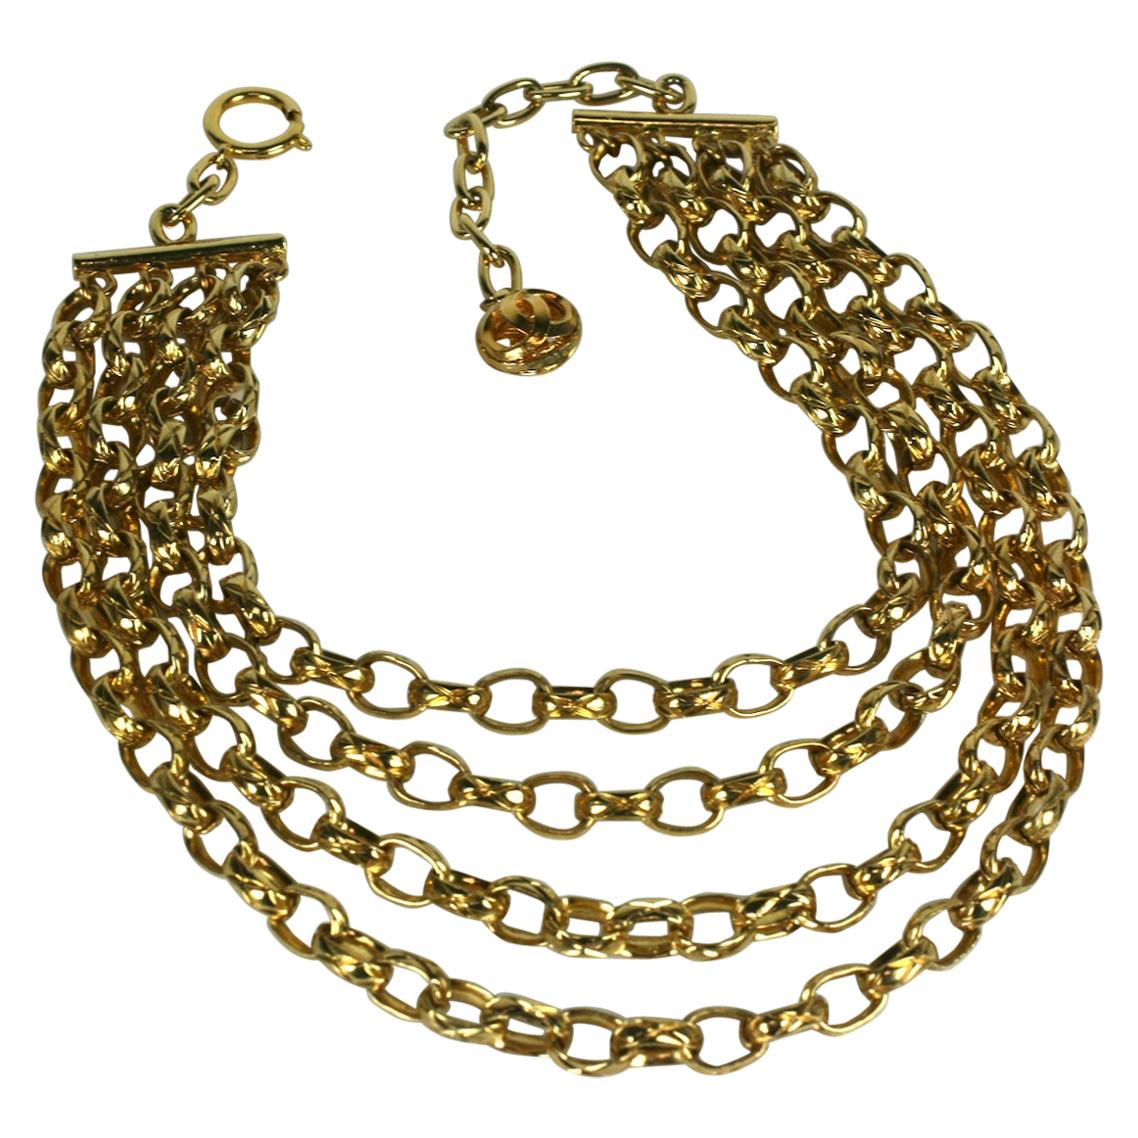 Chanel 4 Strand Textured Chain Necklace